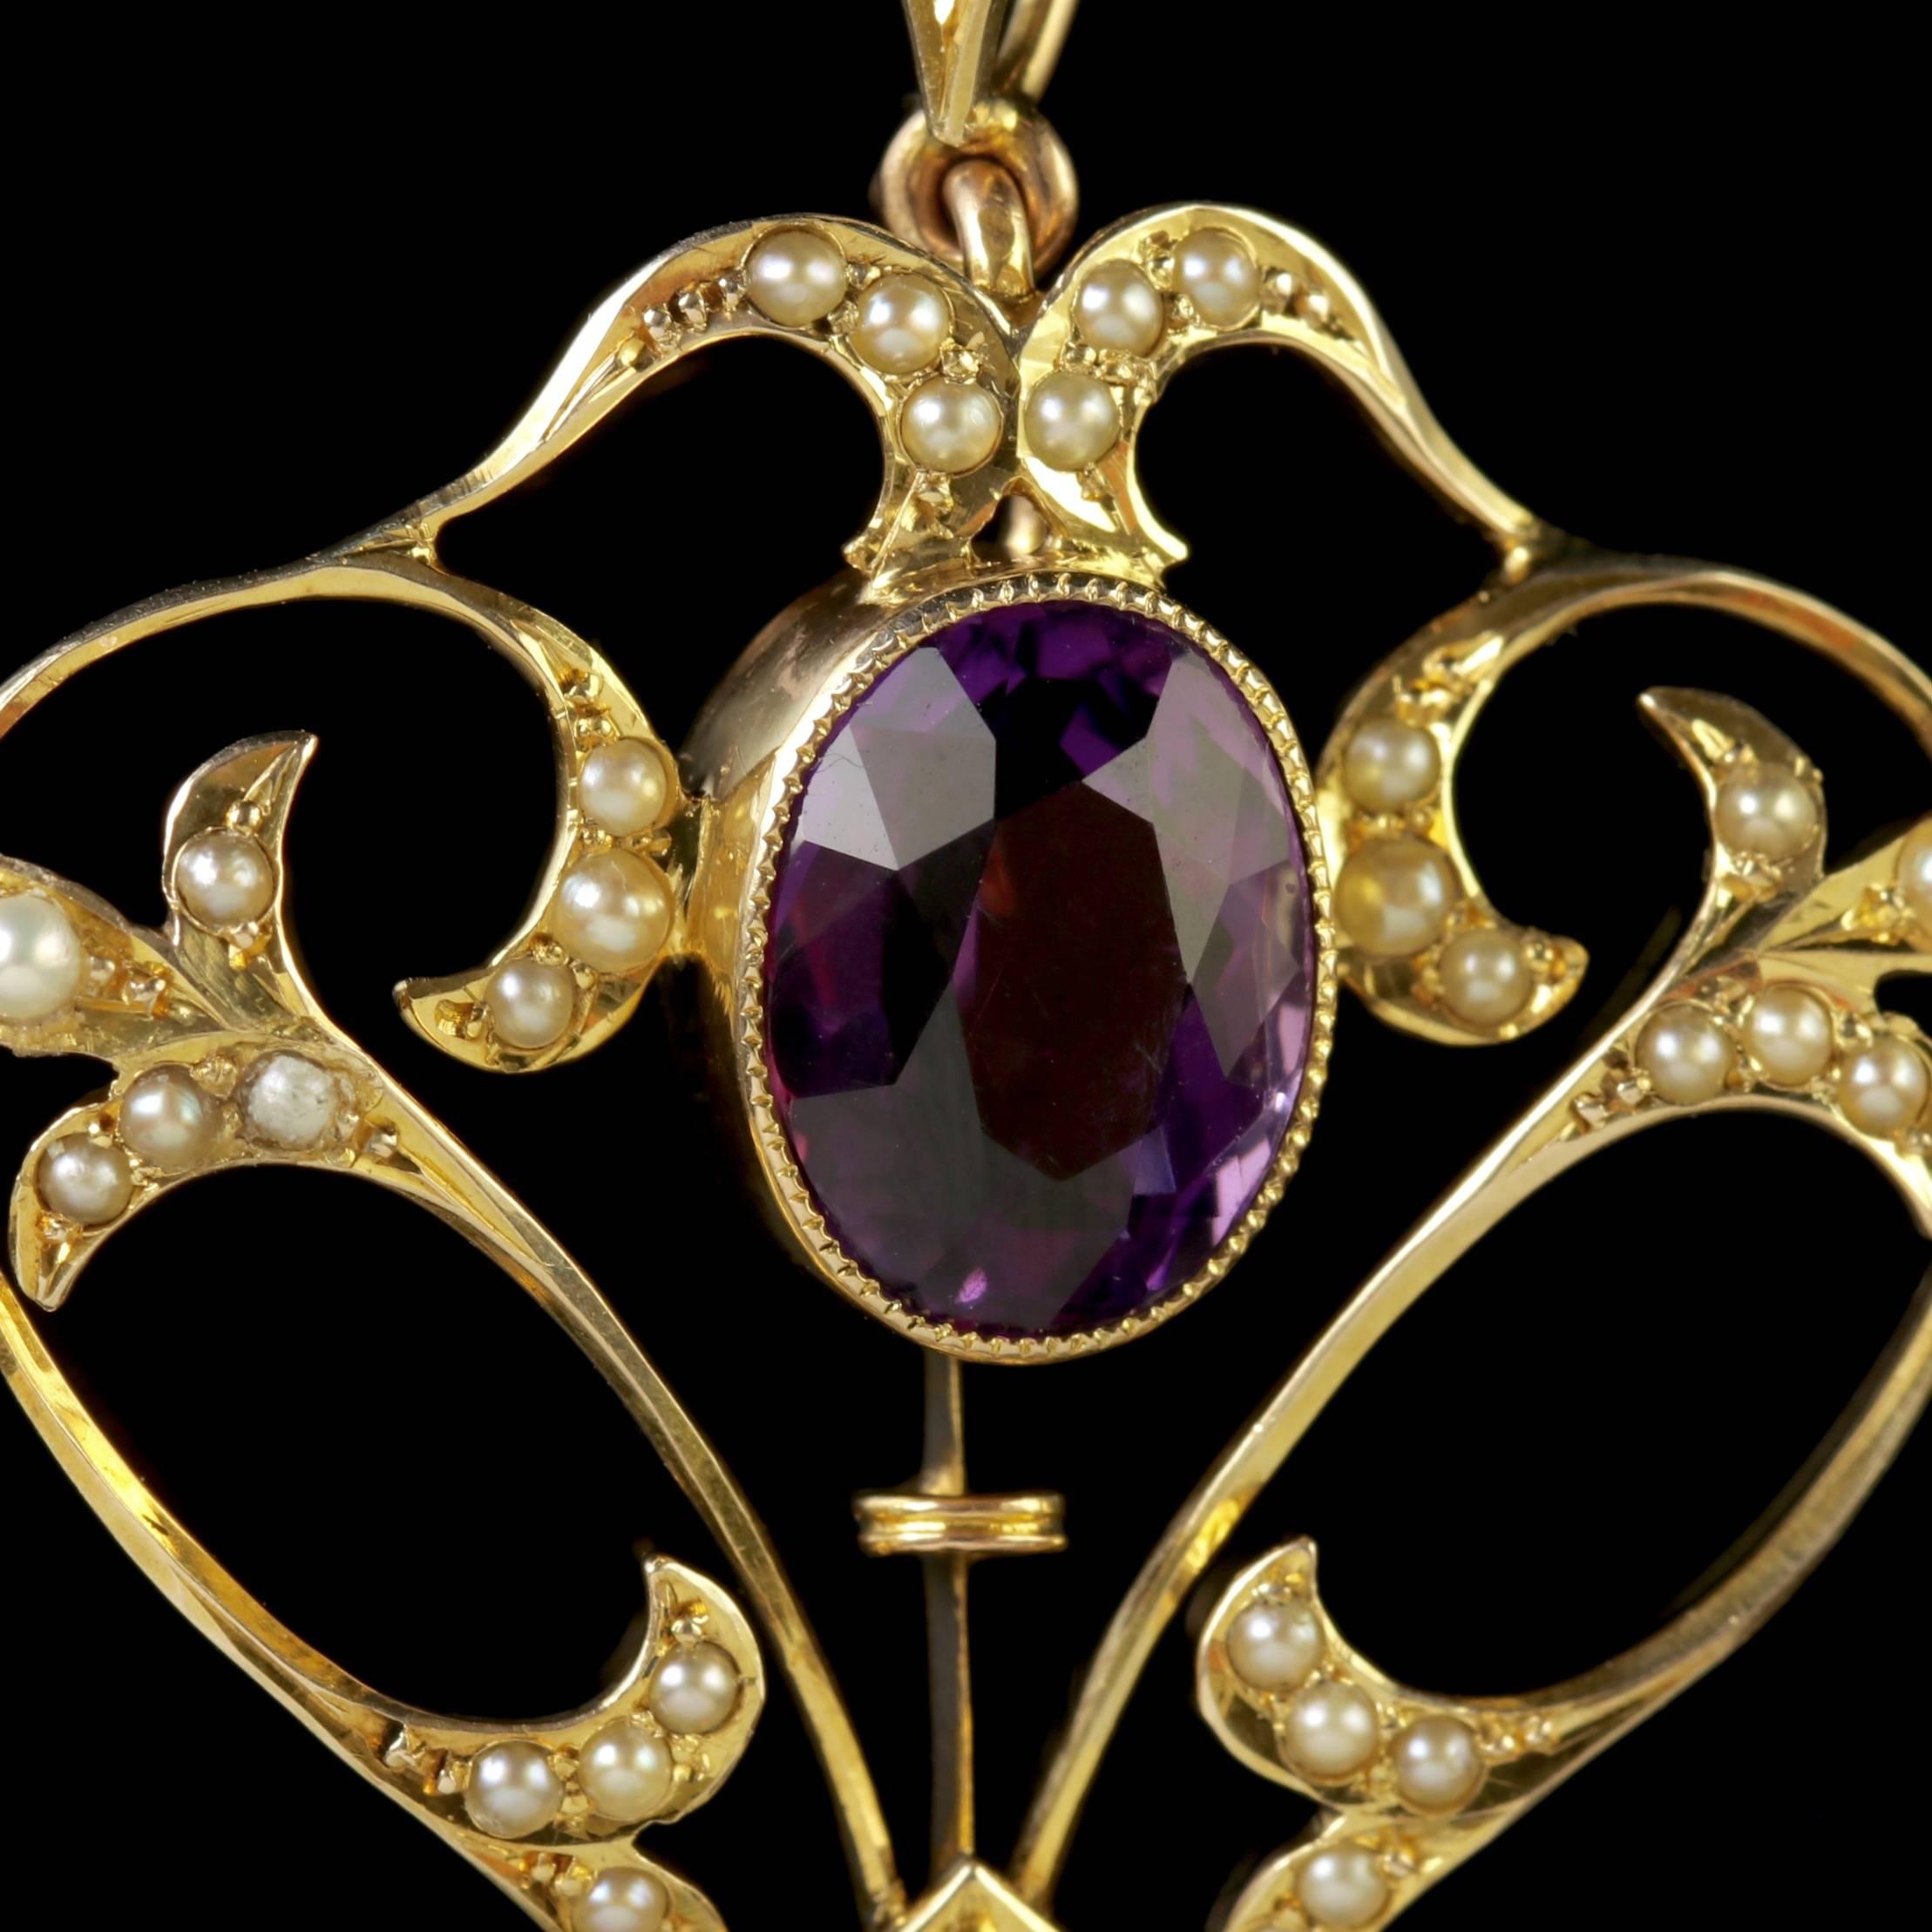 To read more please click continue reading below-

This fabulous antique 9ct Yellow Gold Suffragette Pendant is genuine Victorian, Circa 1900. 

Emmeline Pankhurst was the leader of the British Suffragette movement in the 19th century and through